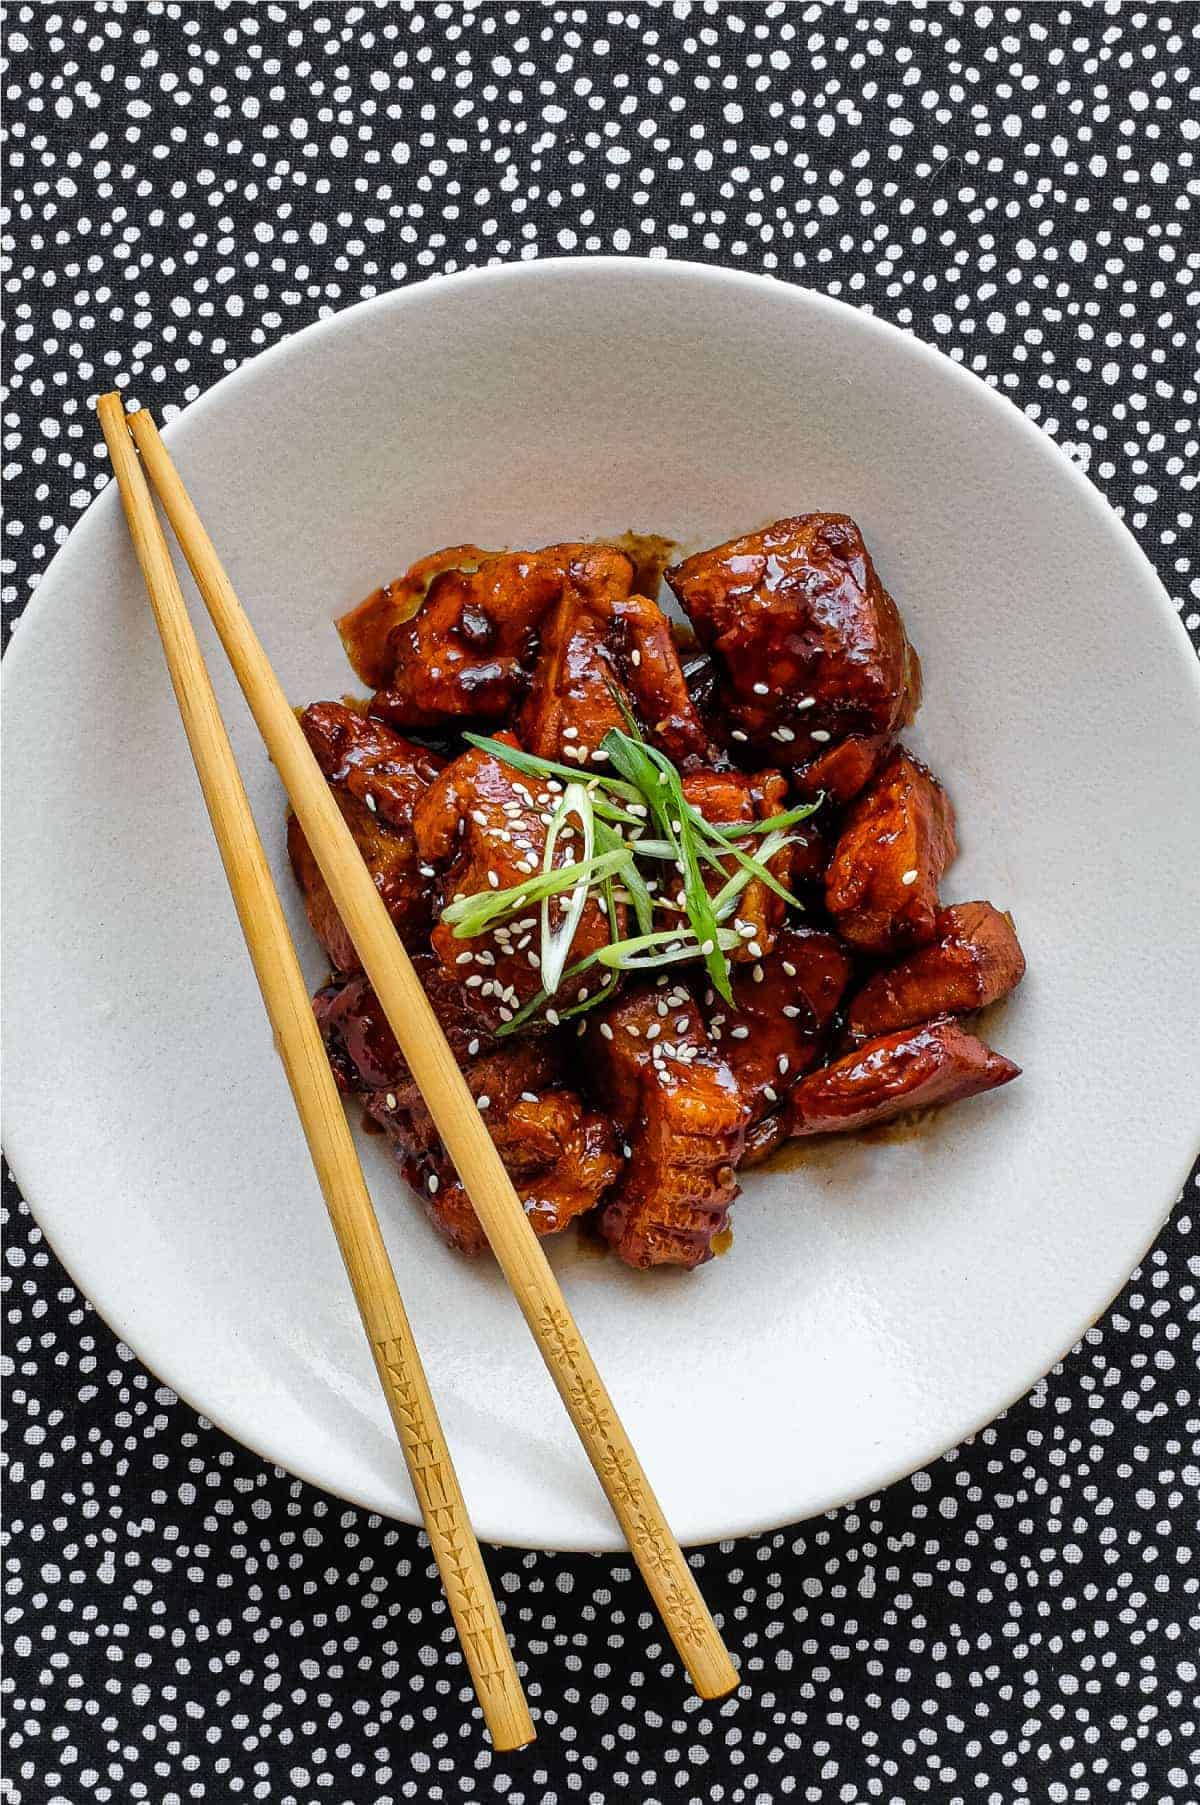 A white plate with chicken and chopsticks on it, showcasing delicious pork belly recipes.